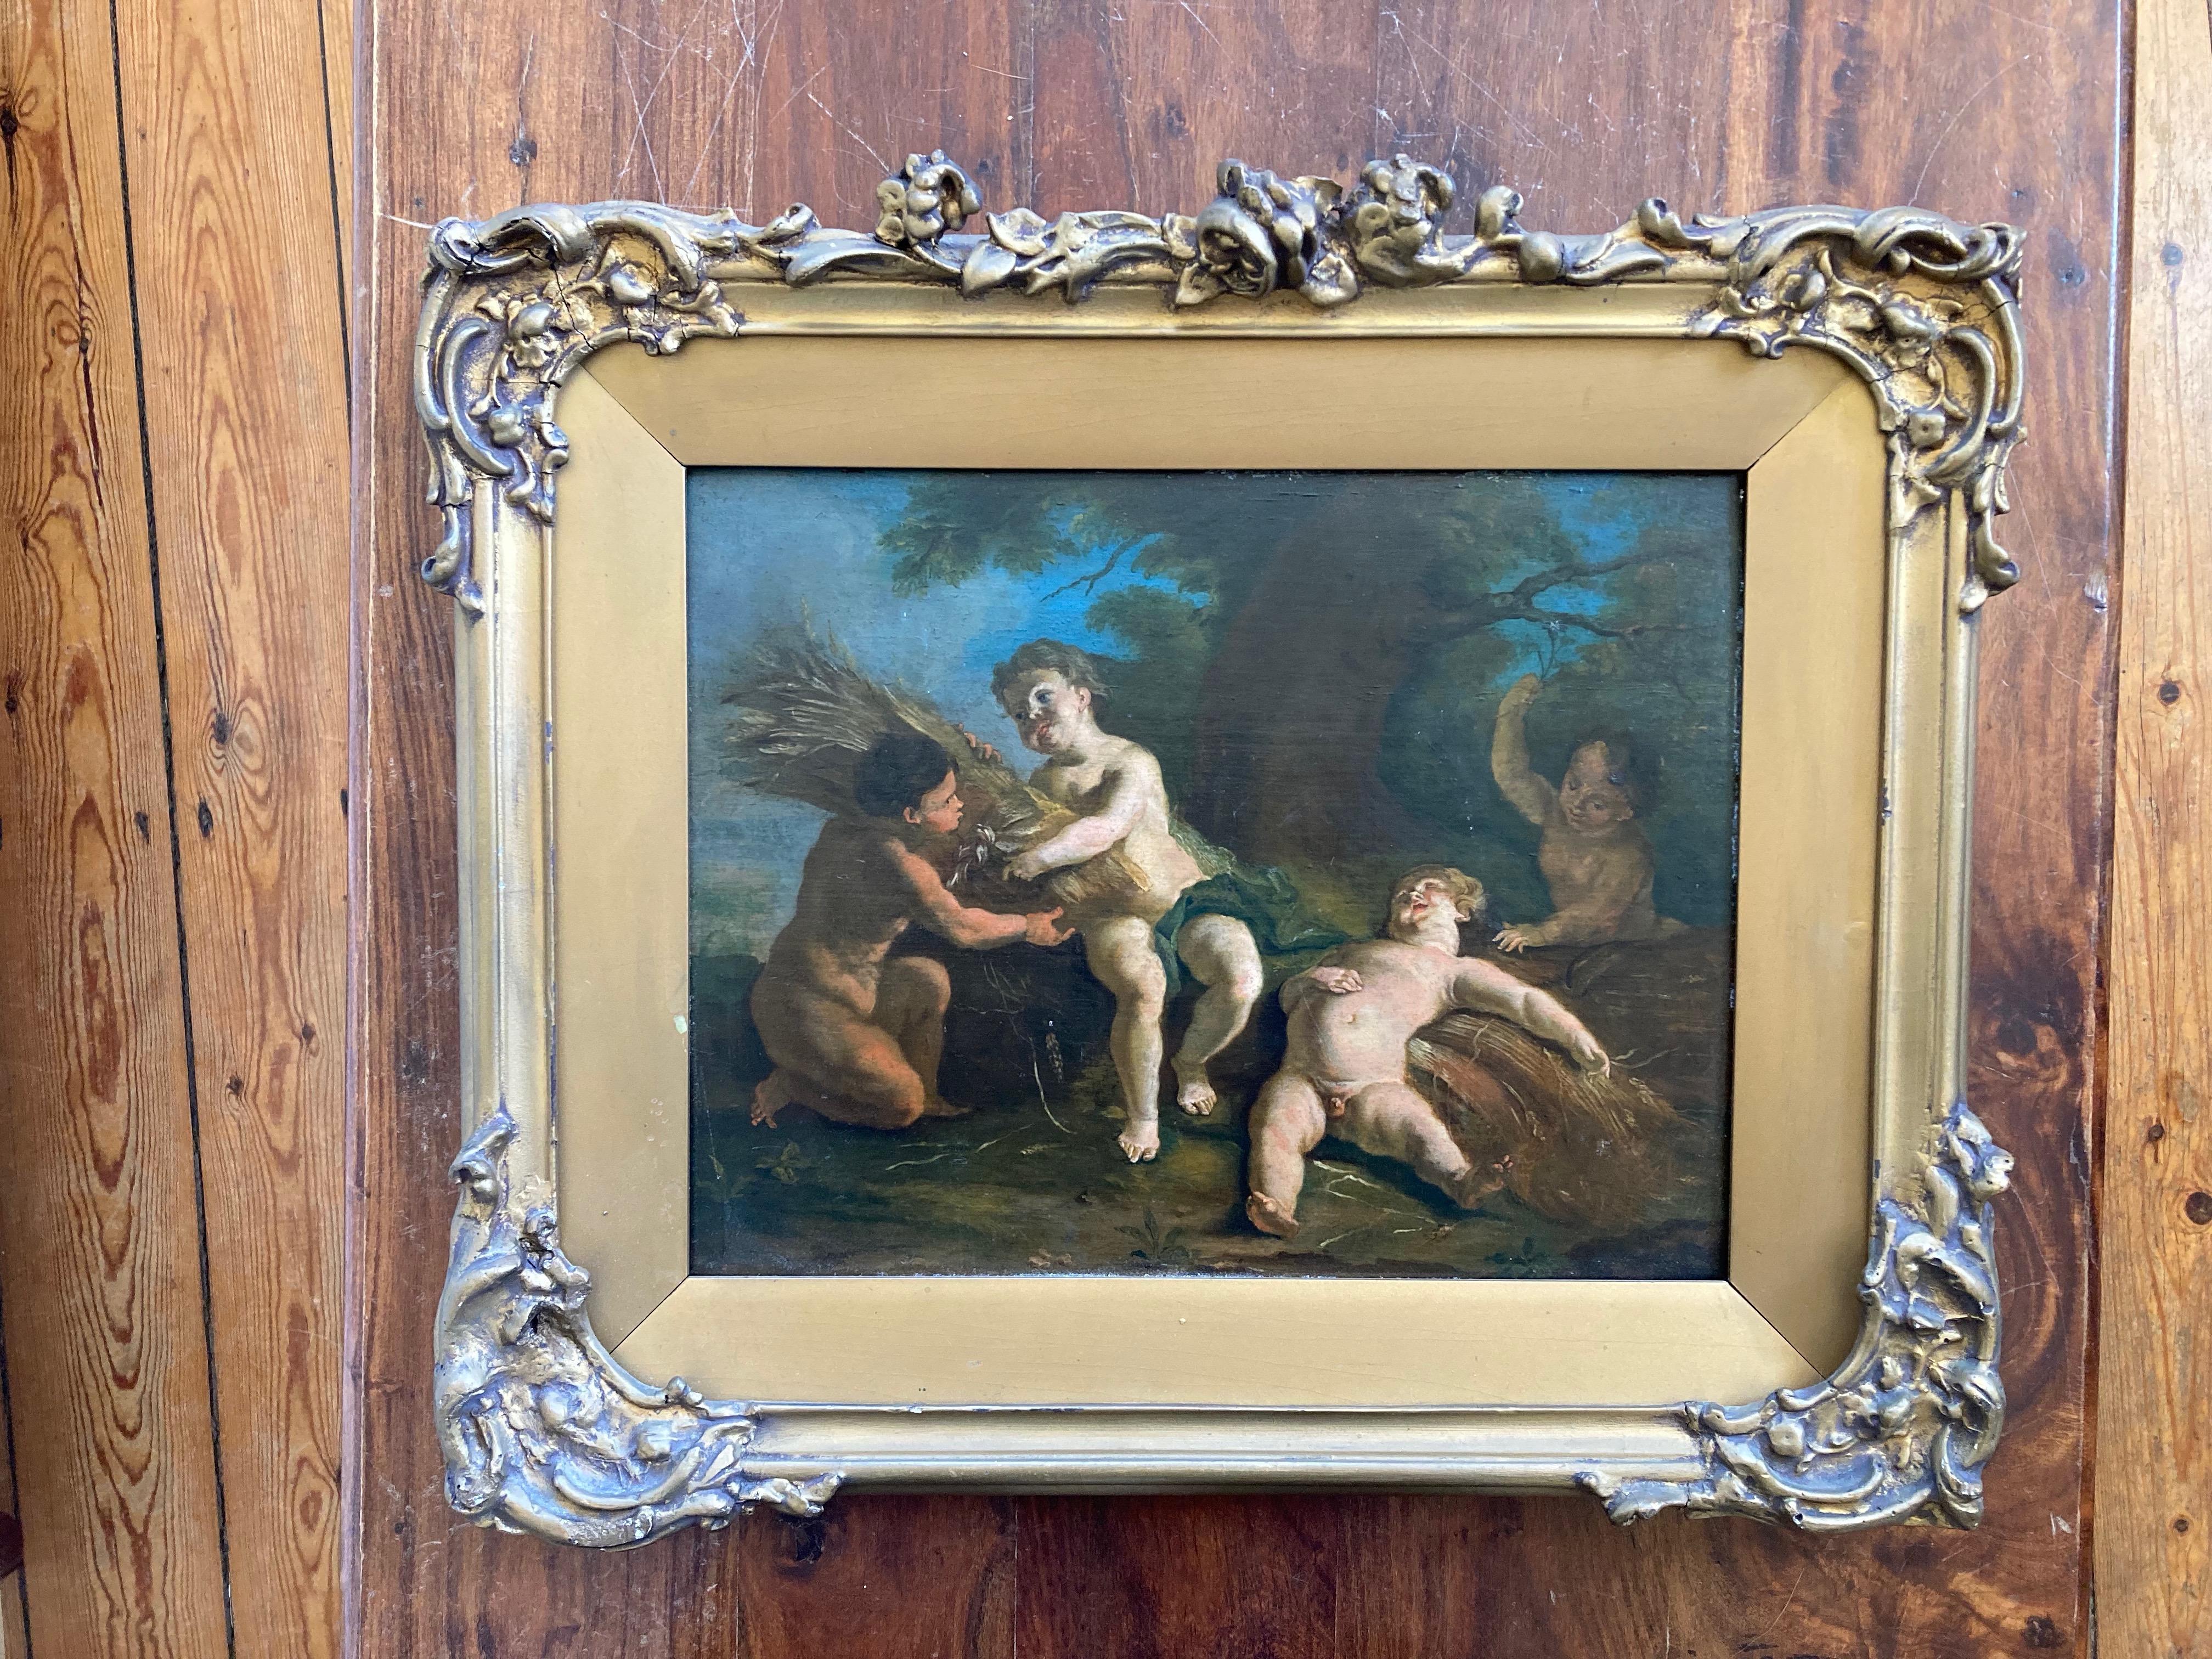 Old master painting of Cherubs cavorting in a woodland setting - Old Masters Painting by Jean-Honoré Fragonard